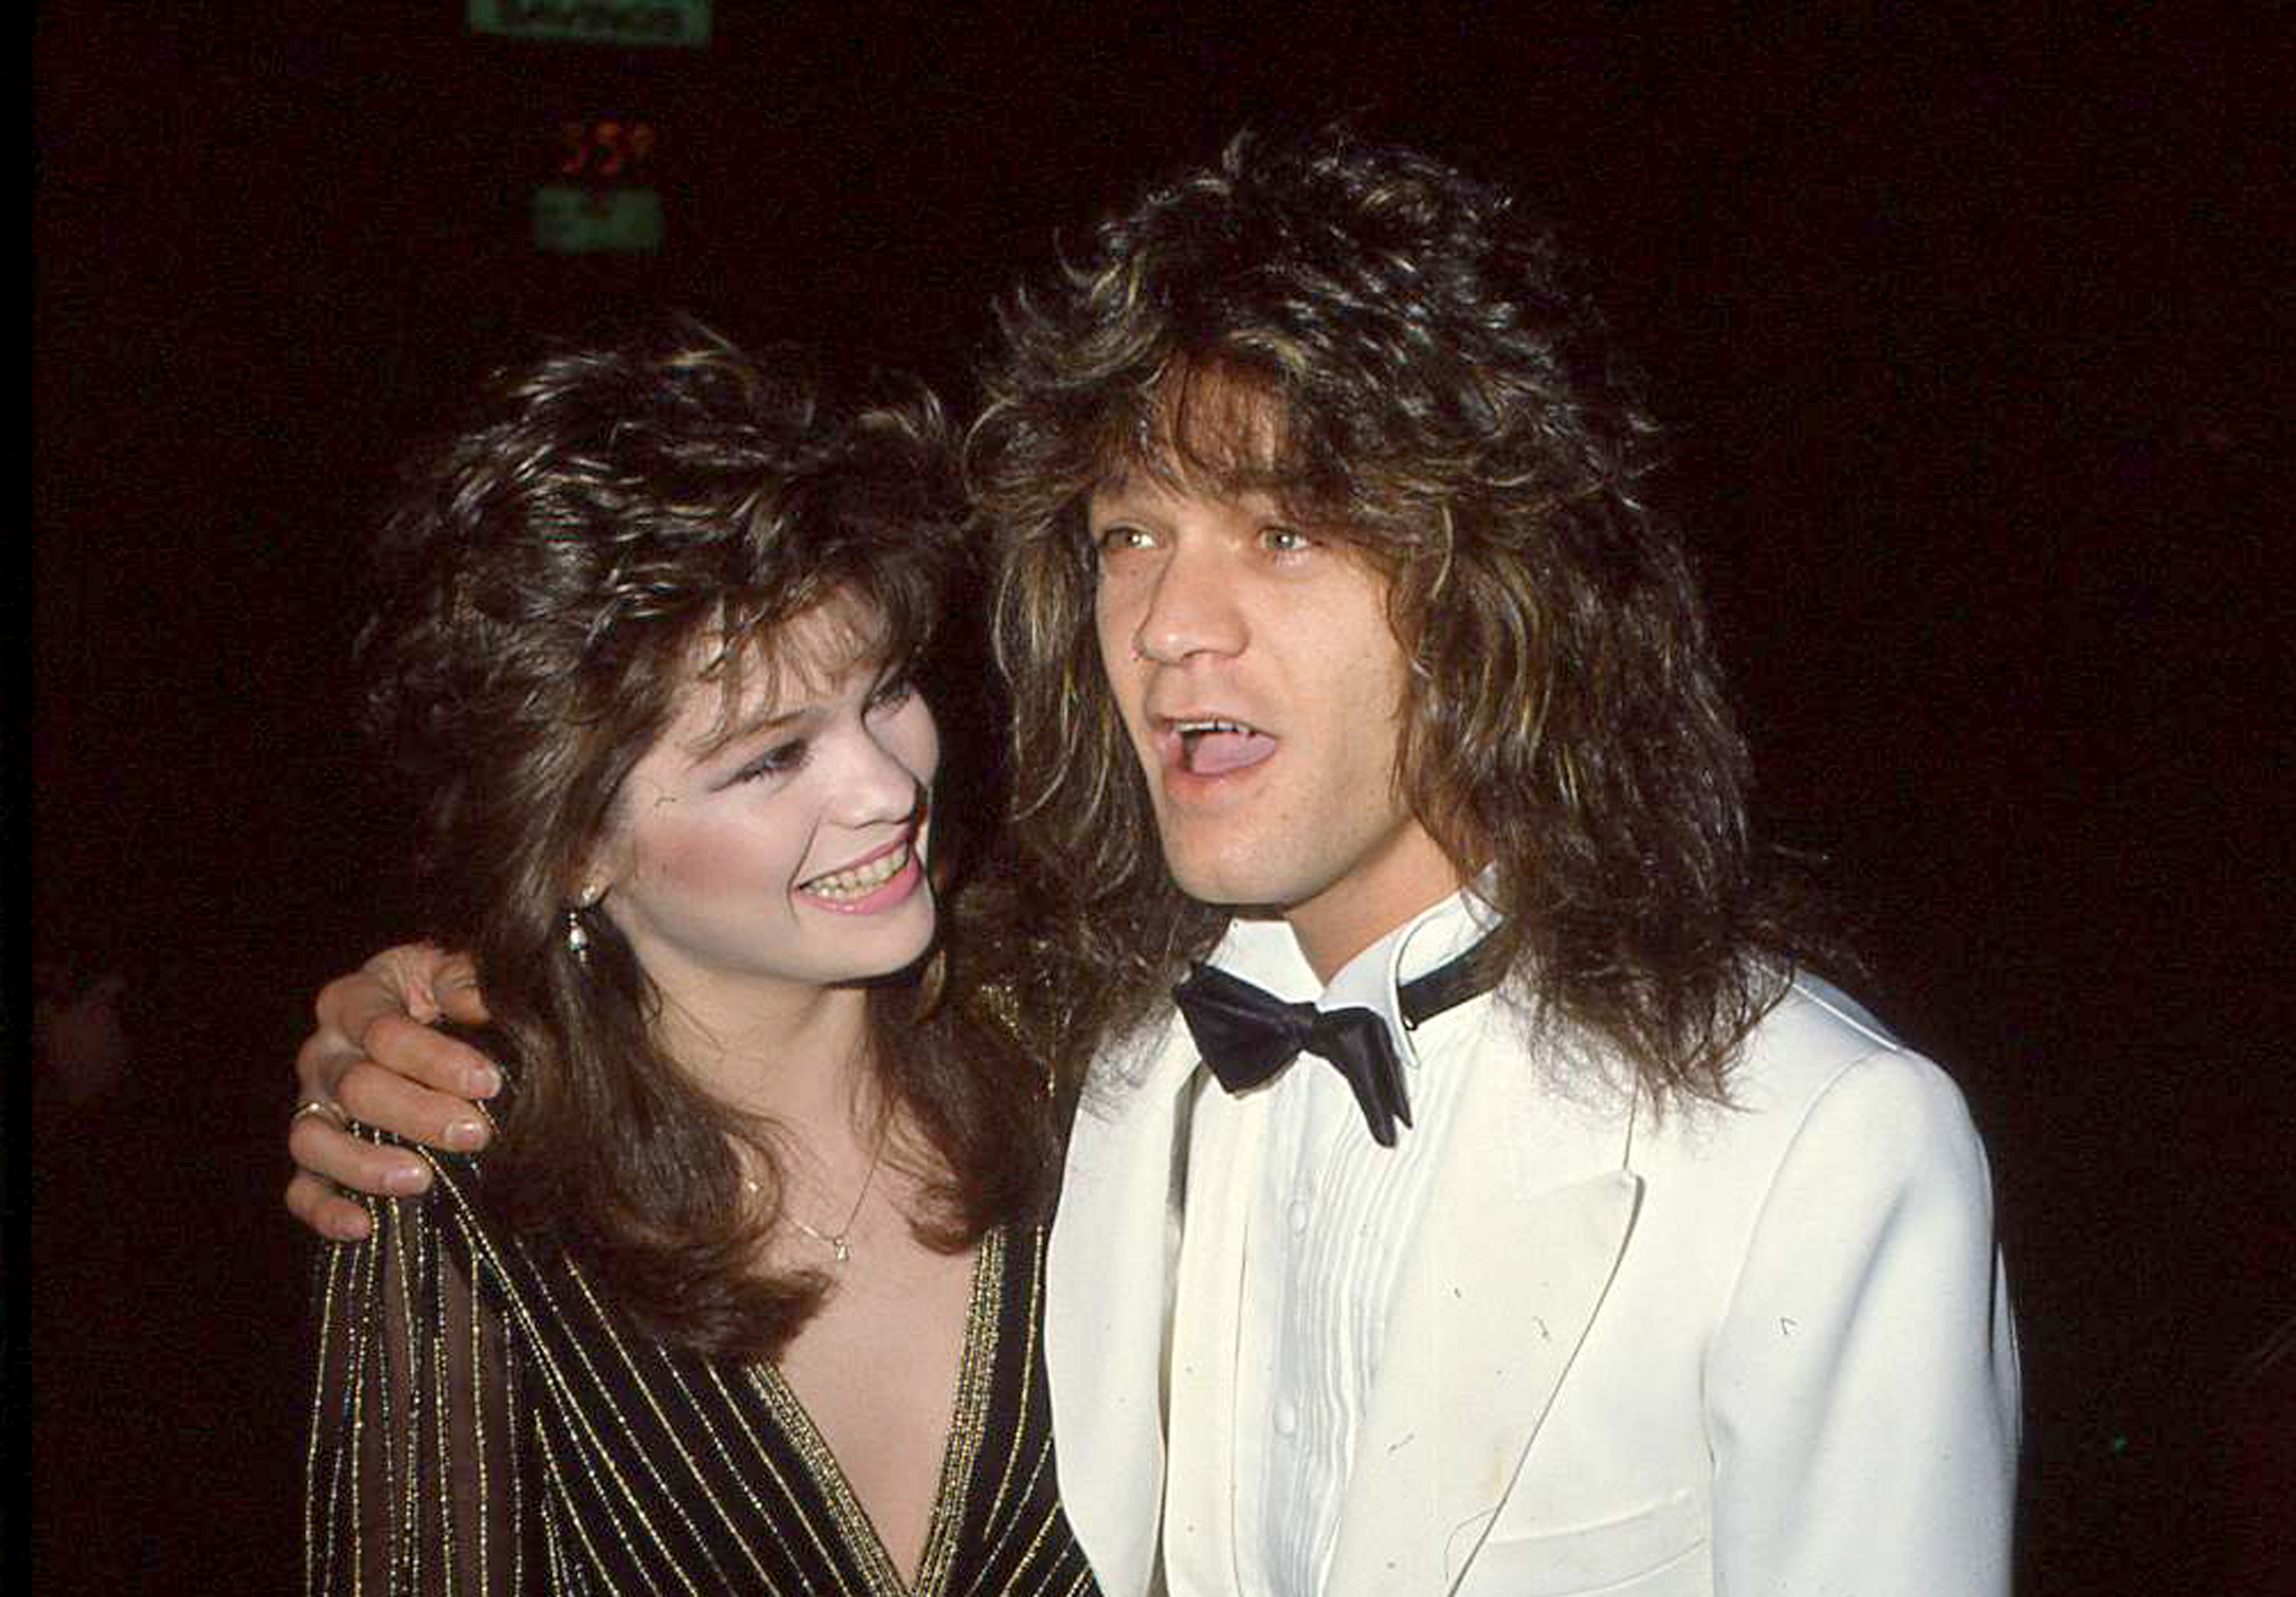 Valerie Bertinelli and Eddie Van Halen at Chasens Restaurant on March 20, 1983, in Beverly Hills, California | Source: Getty Images